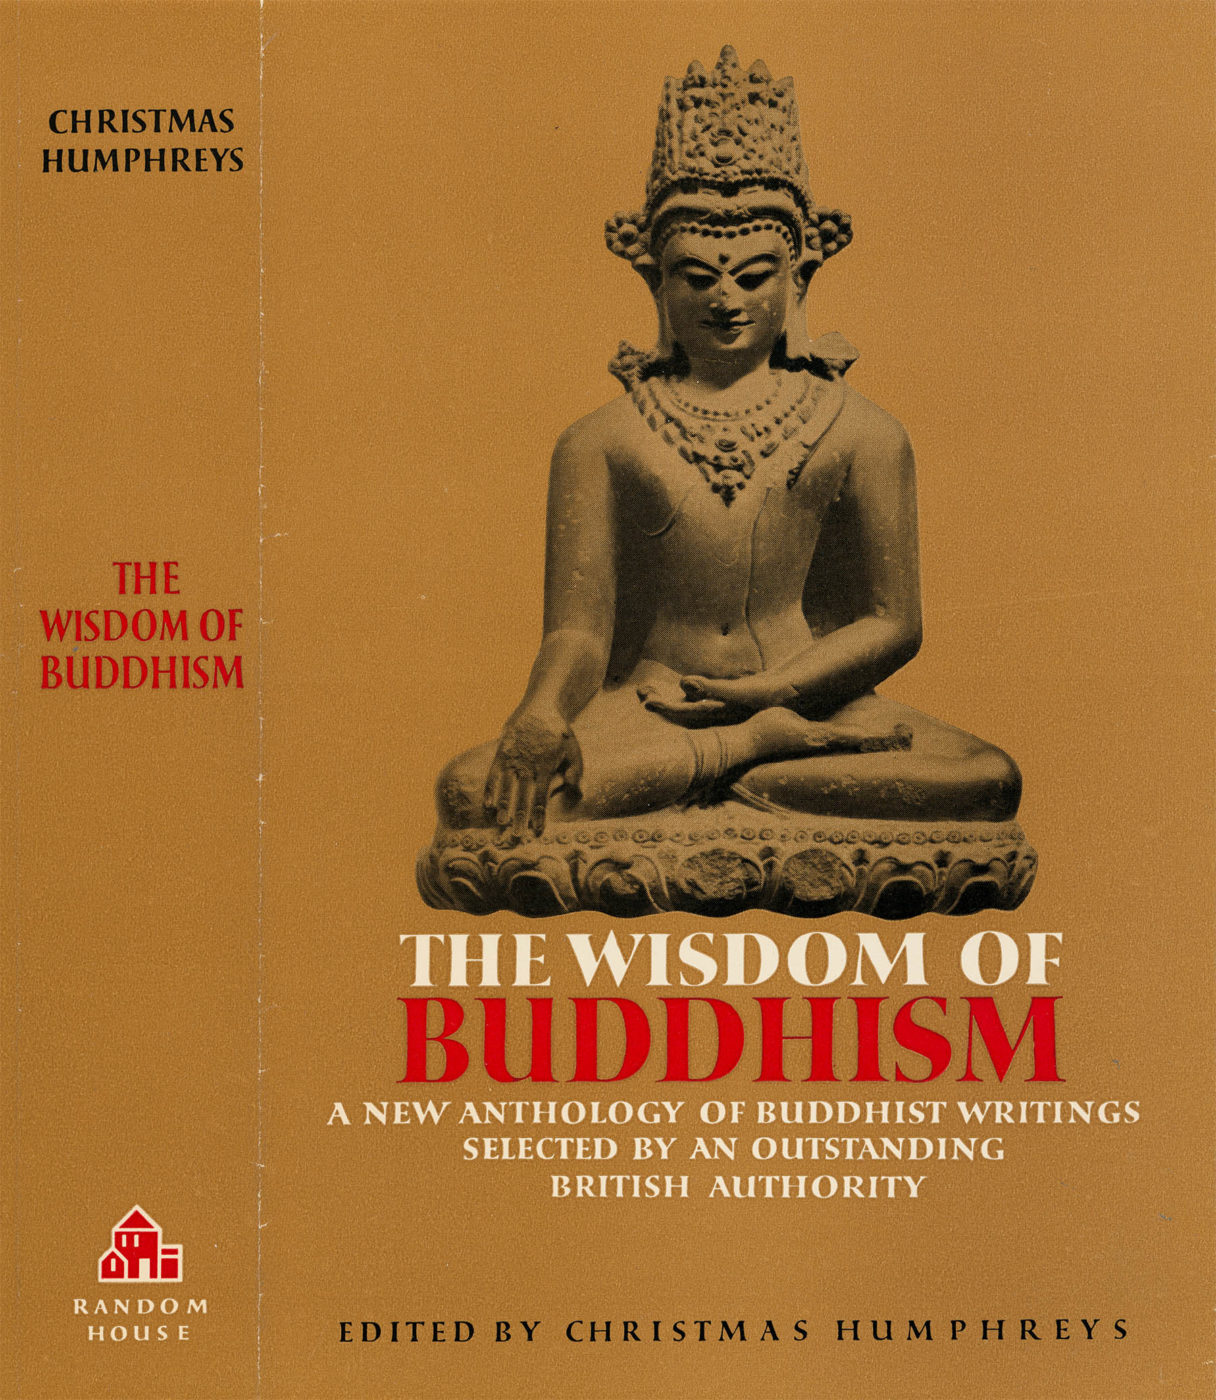 Book jacket of The Wisdom of Buddhism